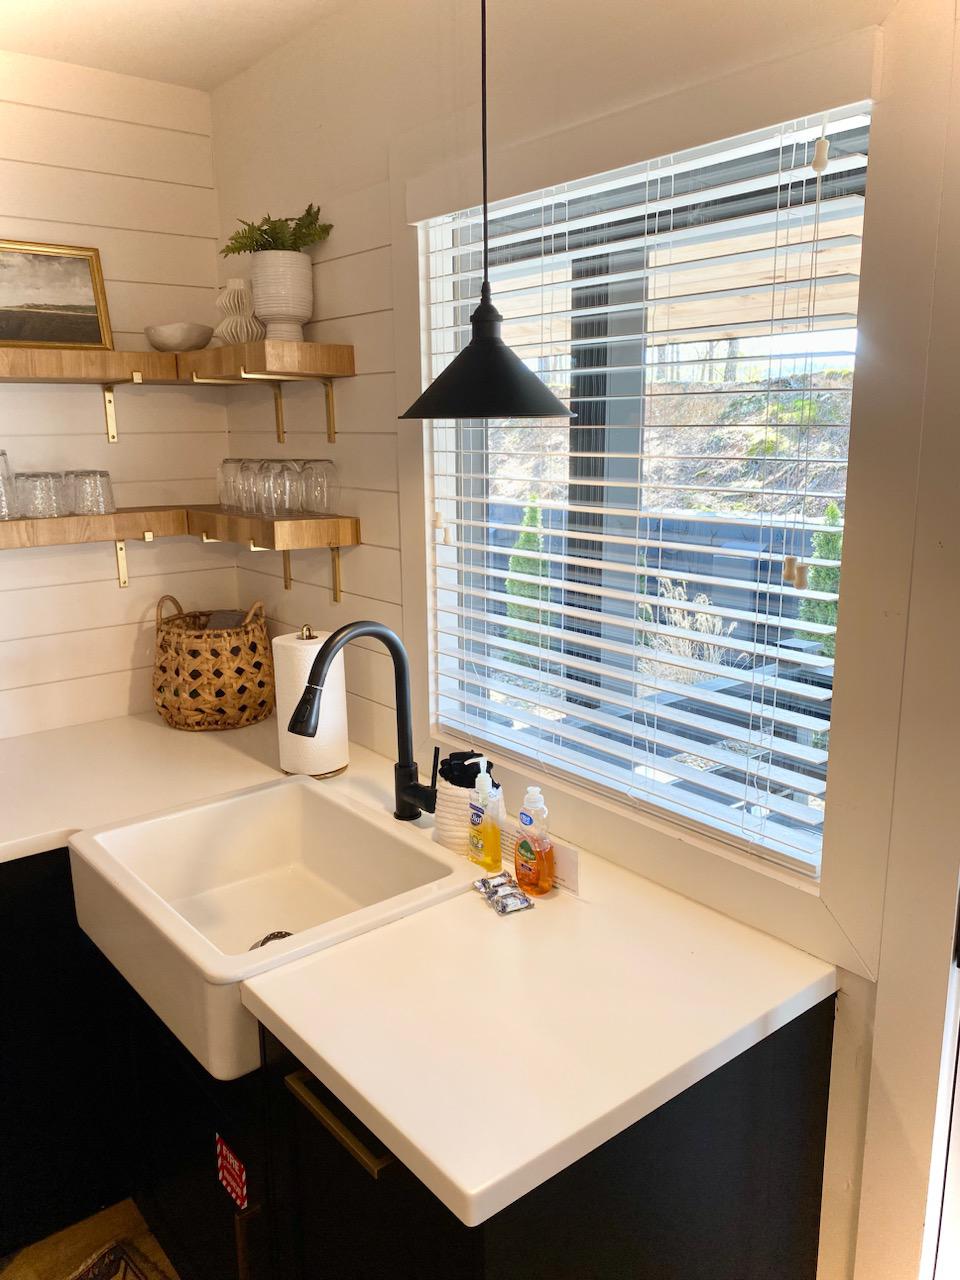 Home is where the heart is, and the kitchen is where the magic happens ✨. Our stylish blinds not onl Budget Blinds of Knoxville & Maryville Knoxville (865)588-3377